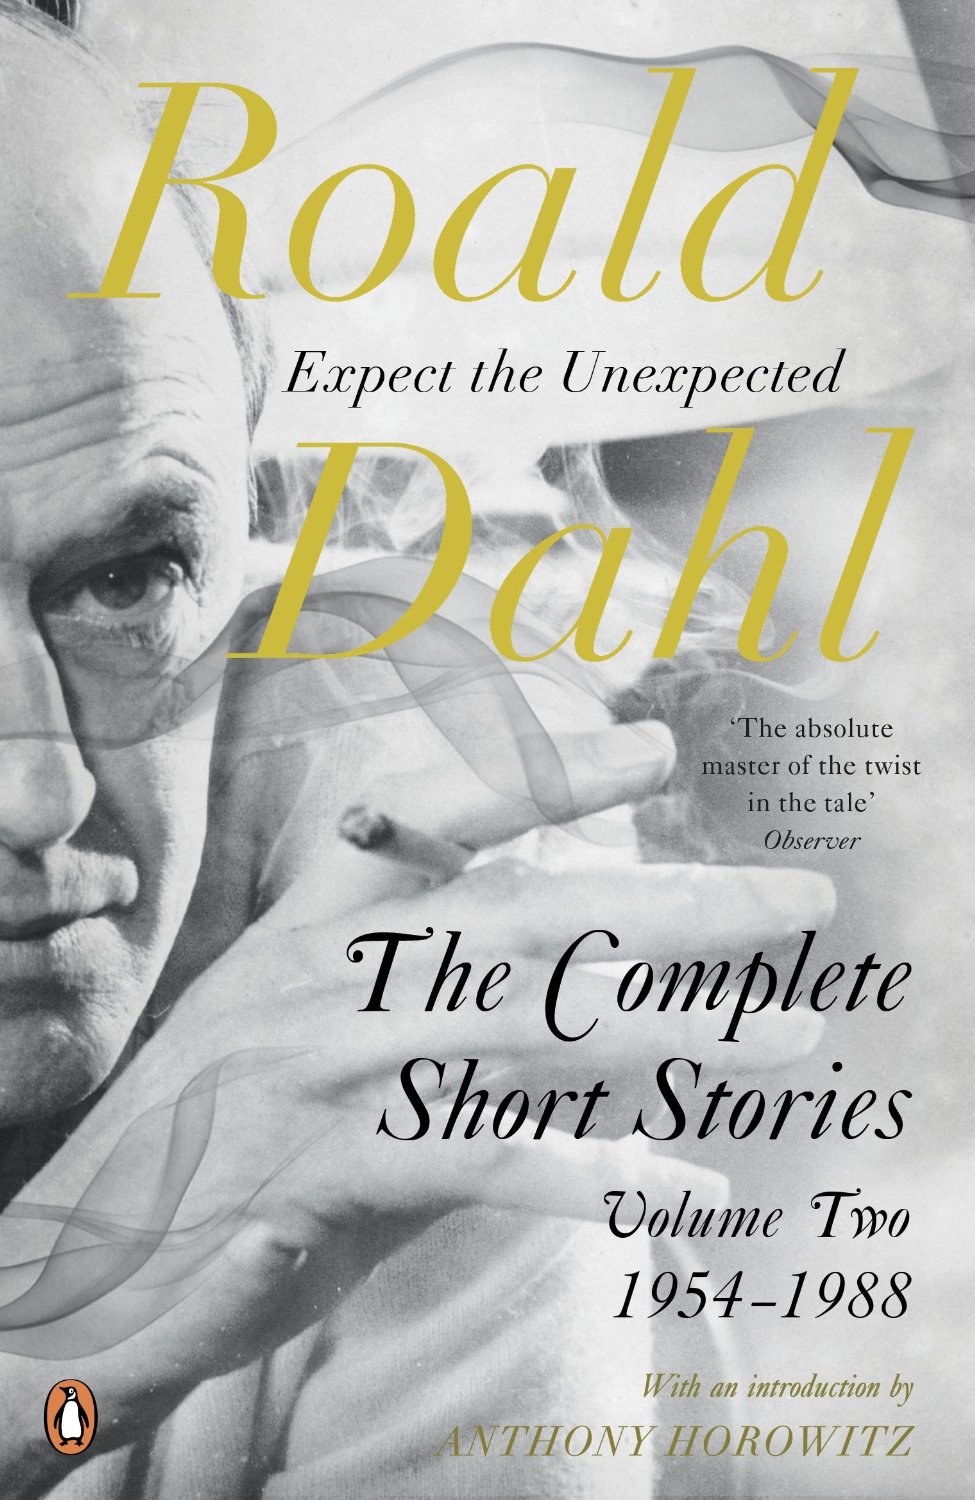 The Collected Short Stories of Roald Dahl, Volume 2 (2014)